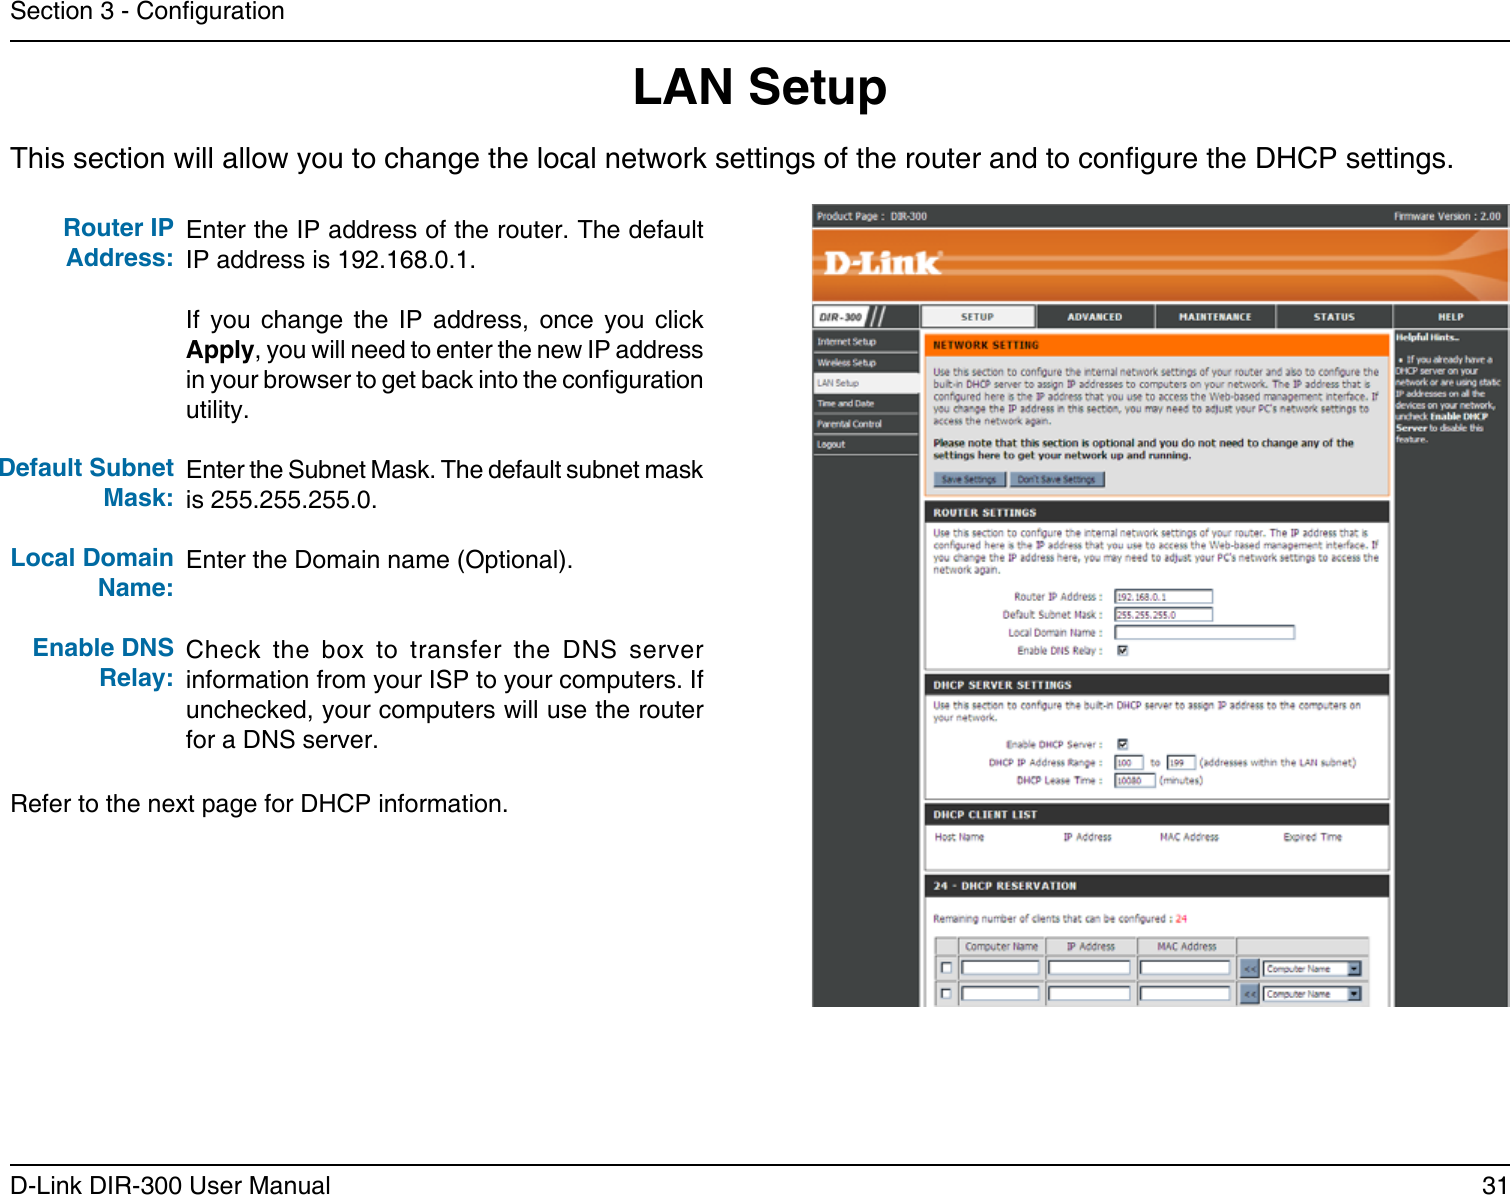 31D-Link DIR-300 User ManualSection 3 - CongurationThis section will allow you to change the local network settings of the router and to congure the DHCP settings.LAN SetupEnter the IP address of the router. The default IP address is 192.168.0.1.If  you  change  the  IP  address,  once  you  click Apply, you will need to enter the new IP address in your browser to get back into the conguration utility.Enter the Subnet Mask. The default subnet mask is 255.255.255.0.Enter the Domain name (Optional).Check  the  box  to  transfer  the  DNS  server information from your ISP to your computers. If unchecked, your computers will use the router for a DNS server.Router IP Address:Default Subnet Mask:Local Domain Name:Enable DNS Relay:Refer to the next page for DHCP information.